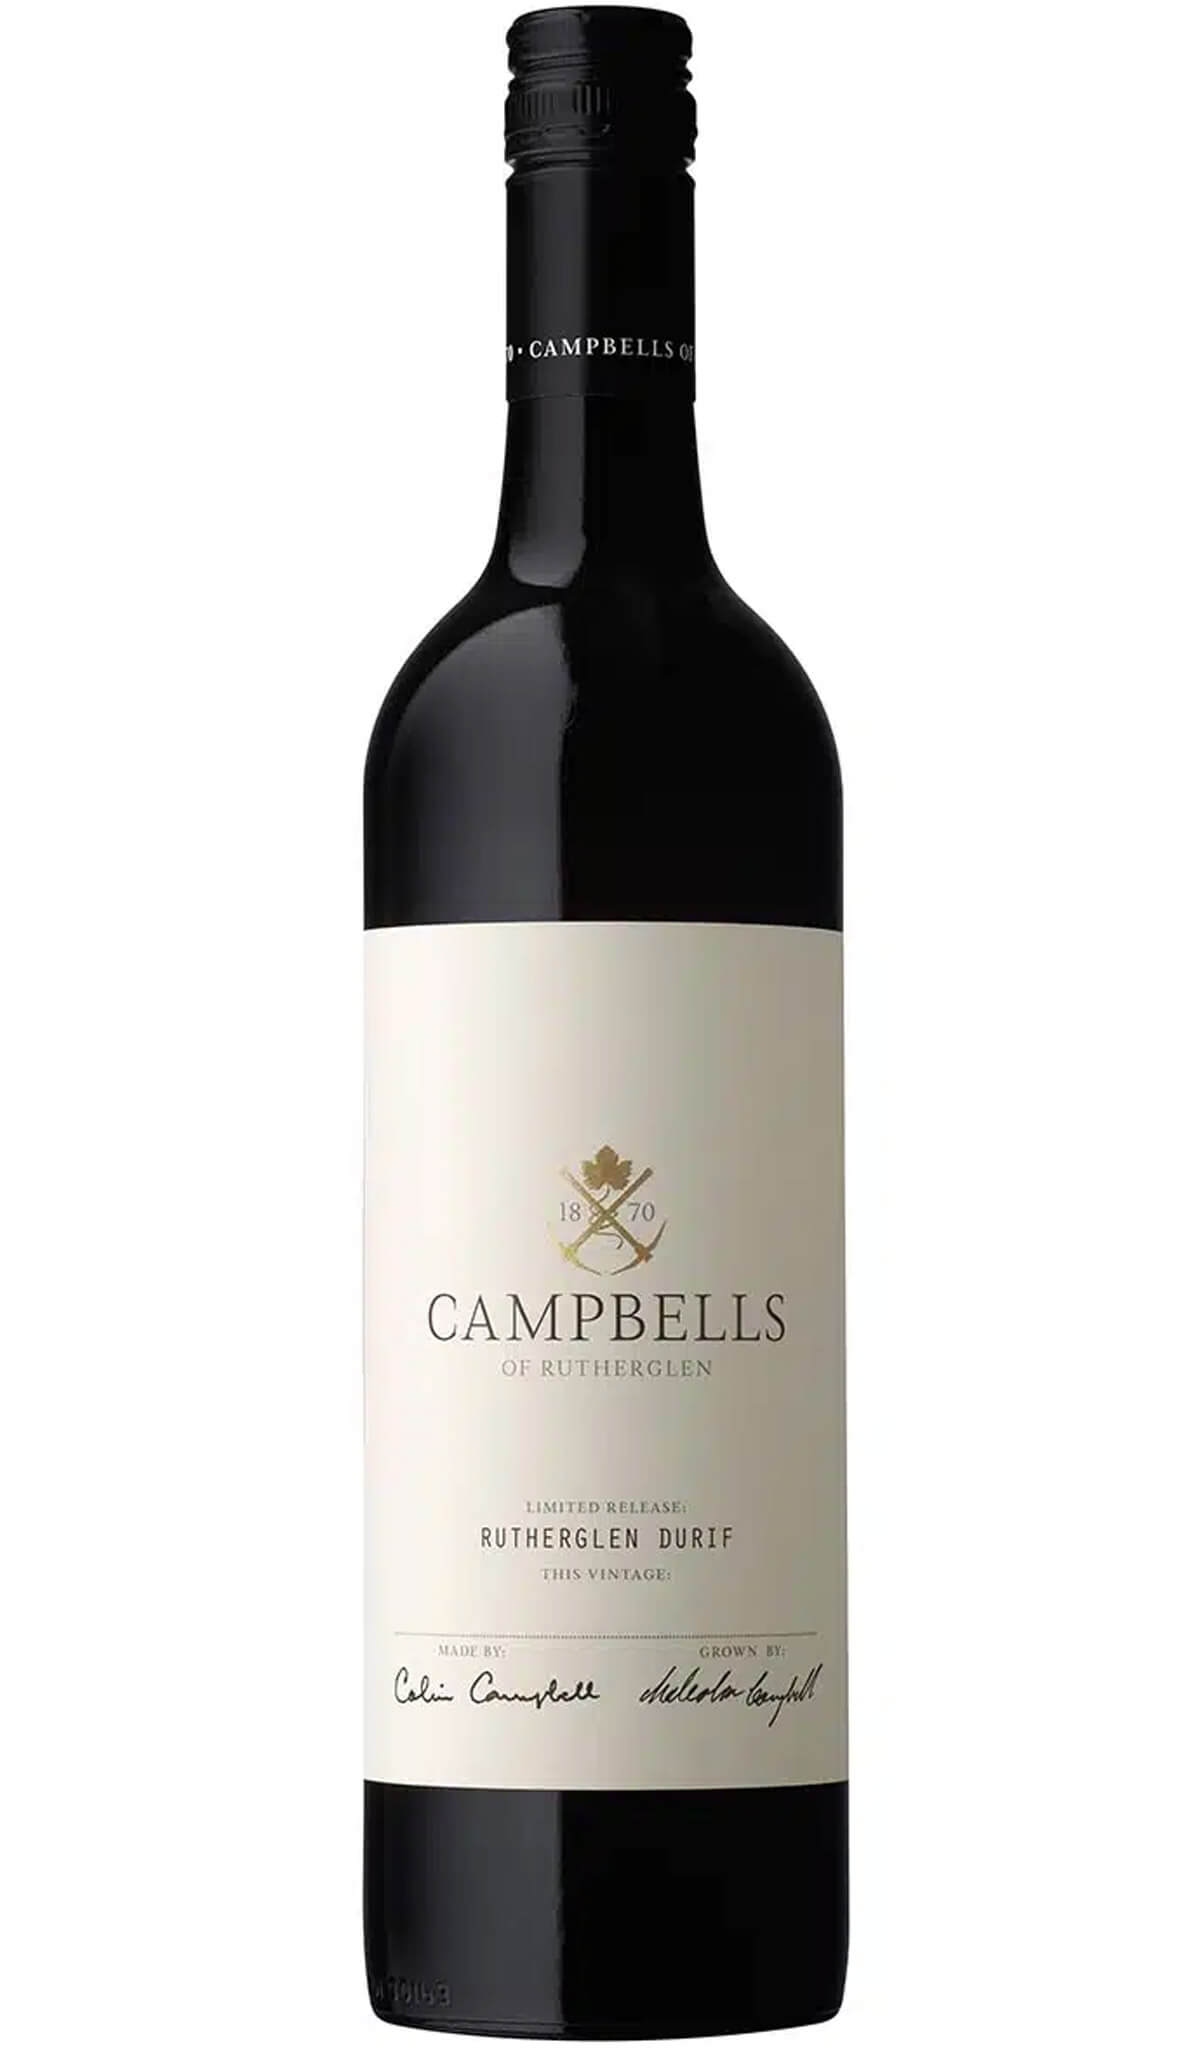 Find out more or buy Campbells Rutherglen Durif 2021 online at Wine Sellers Direct - Australia’s independent liquor specialists.